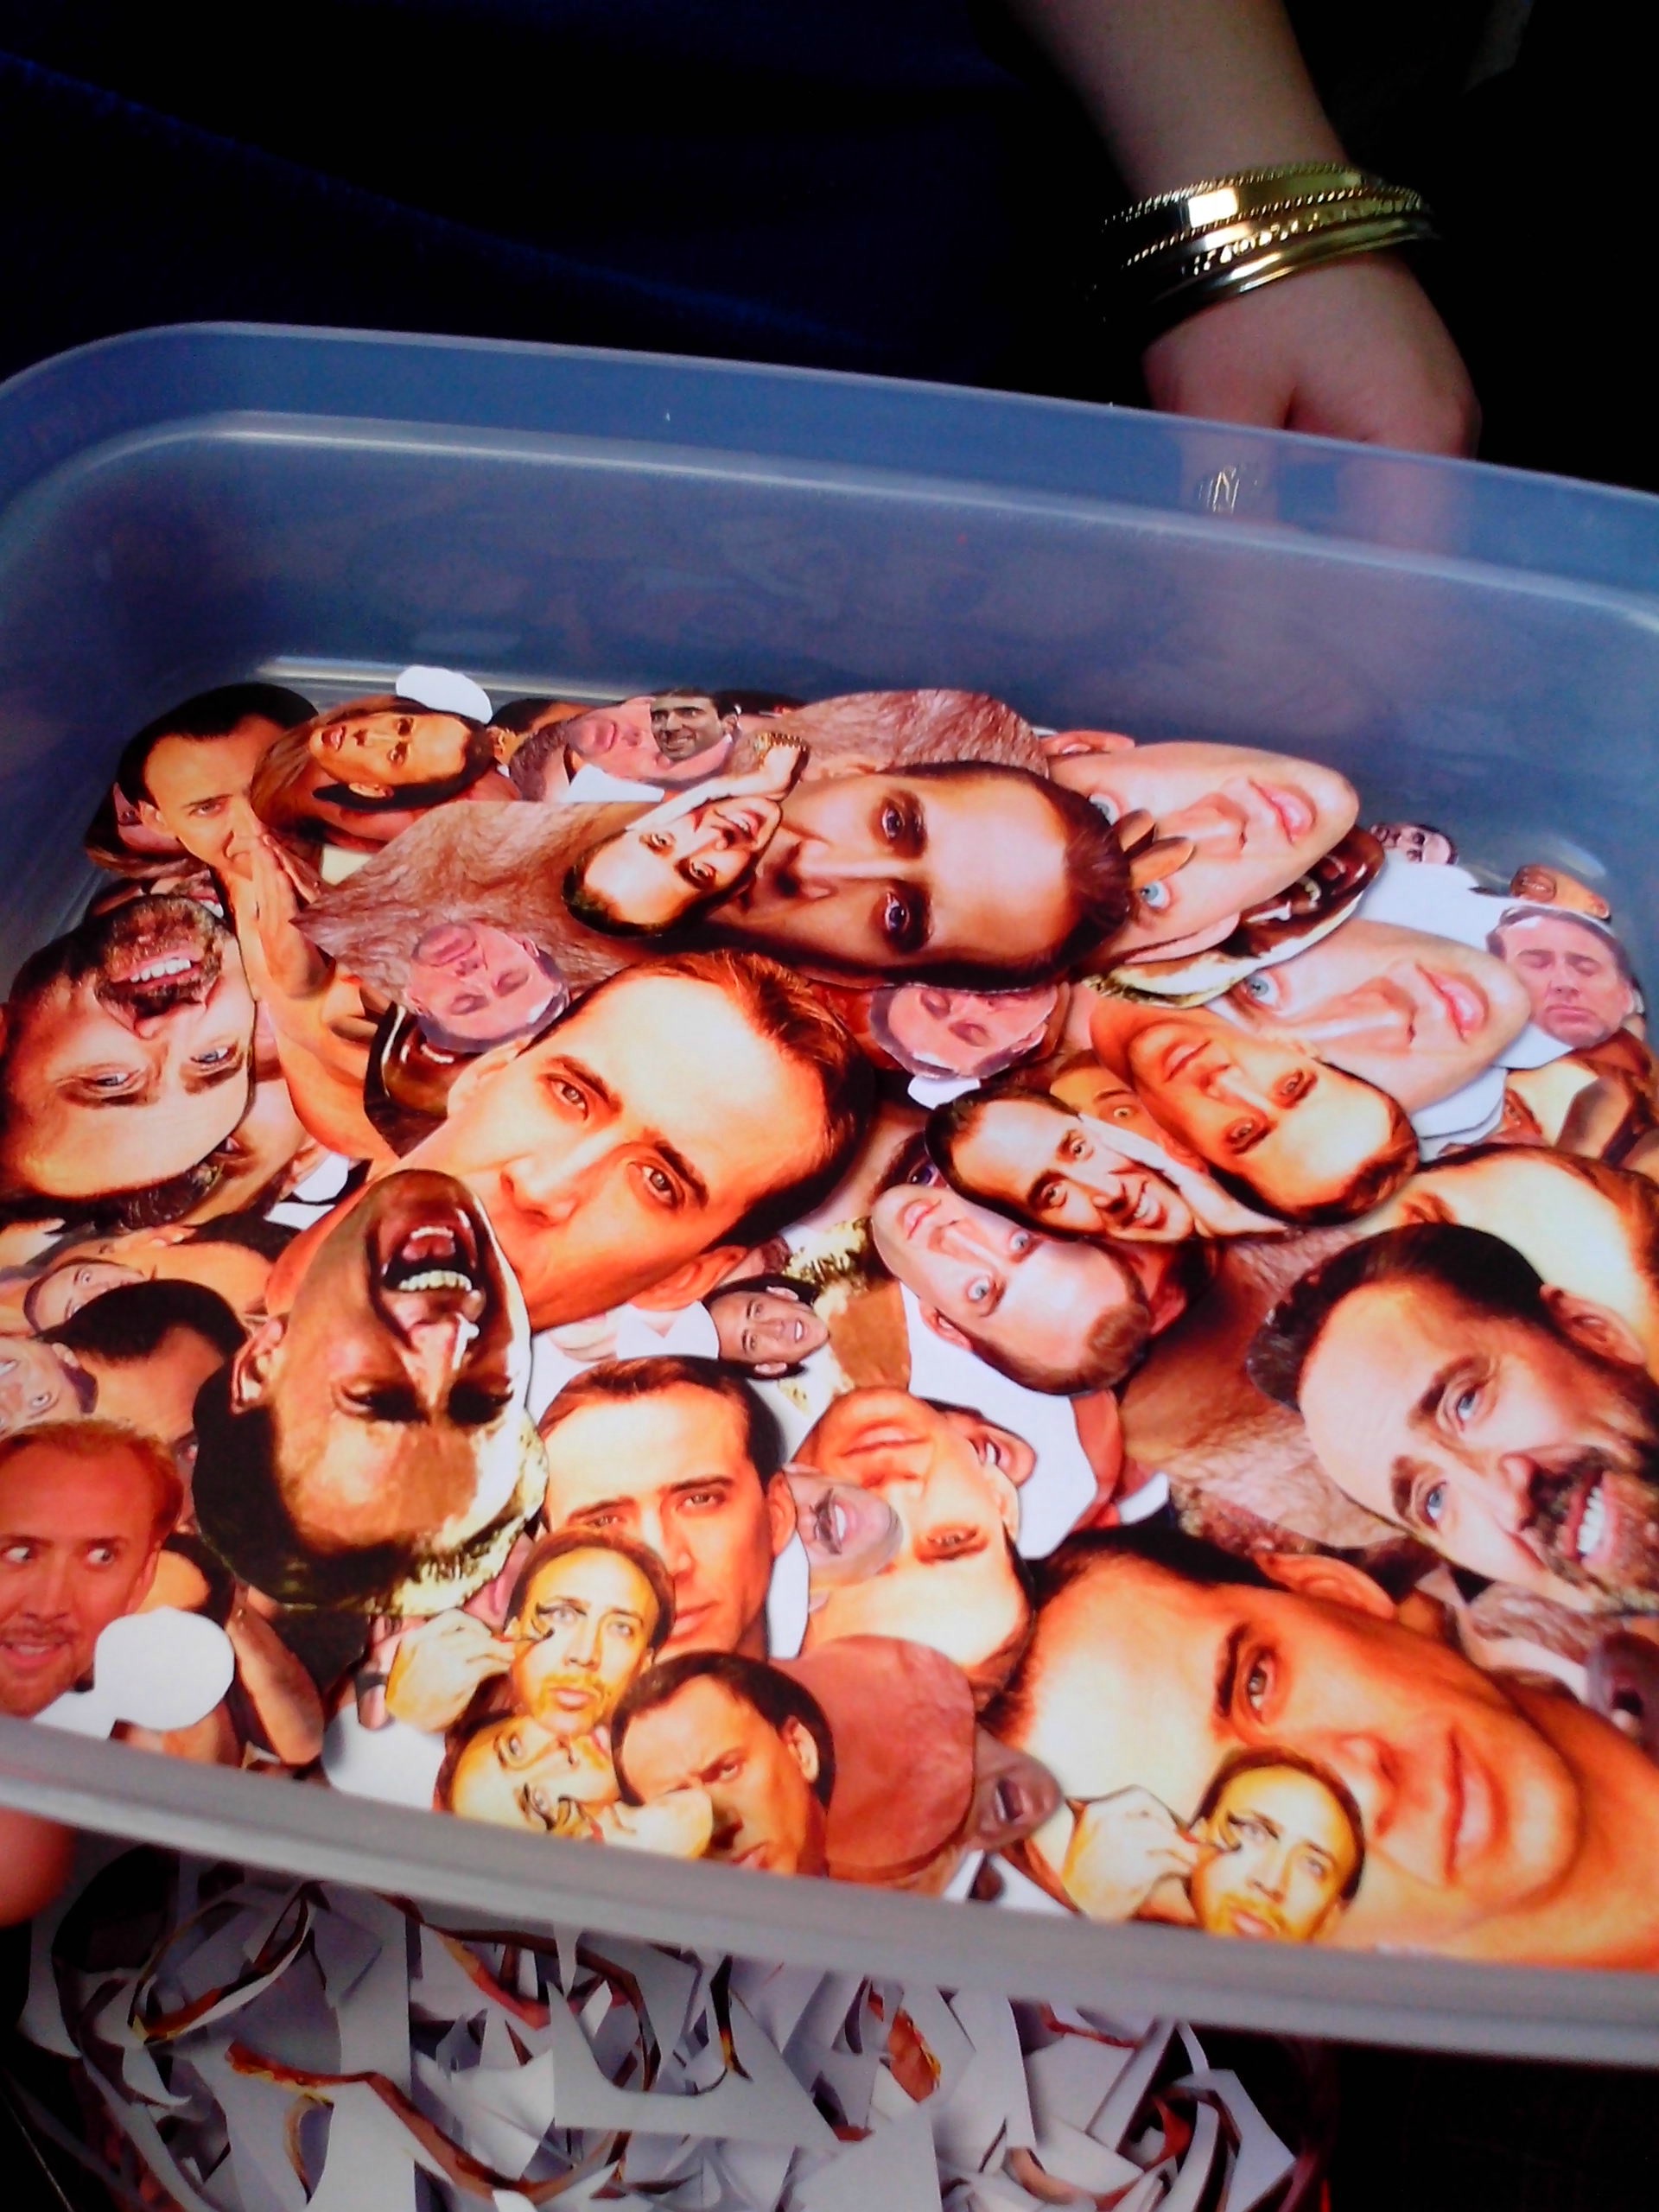 Finished cutting 1000 Nicolas Cage's stupid face